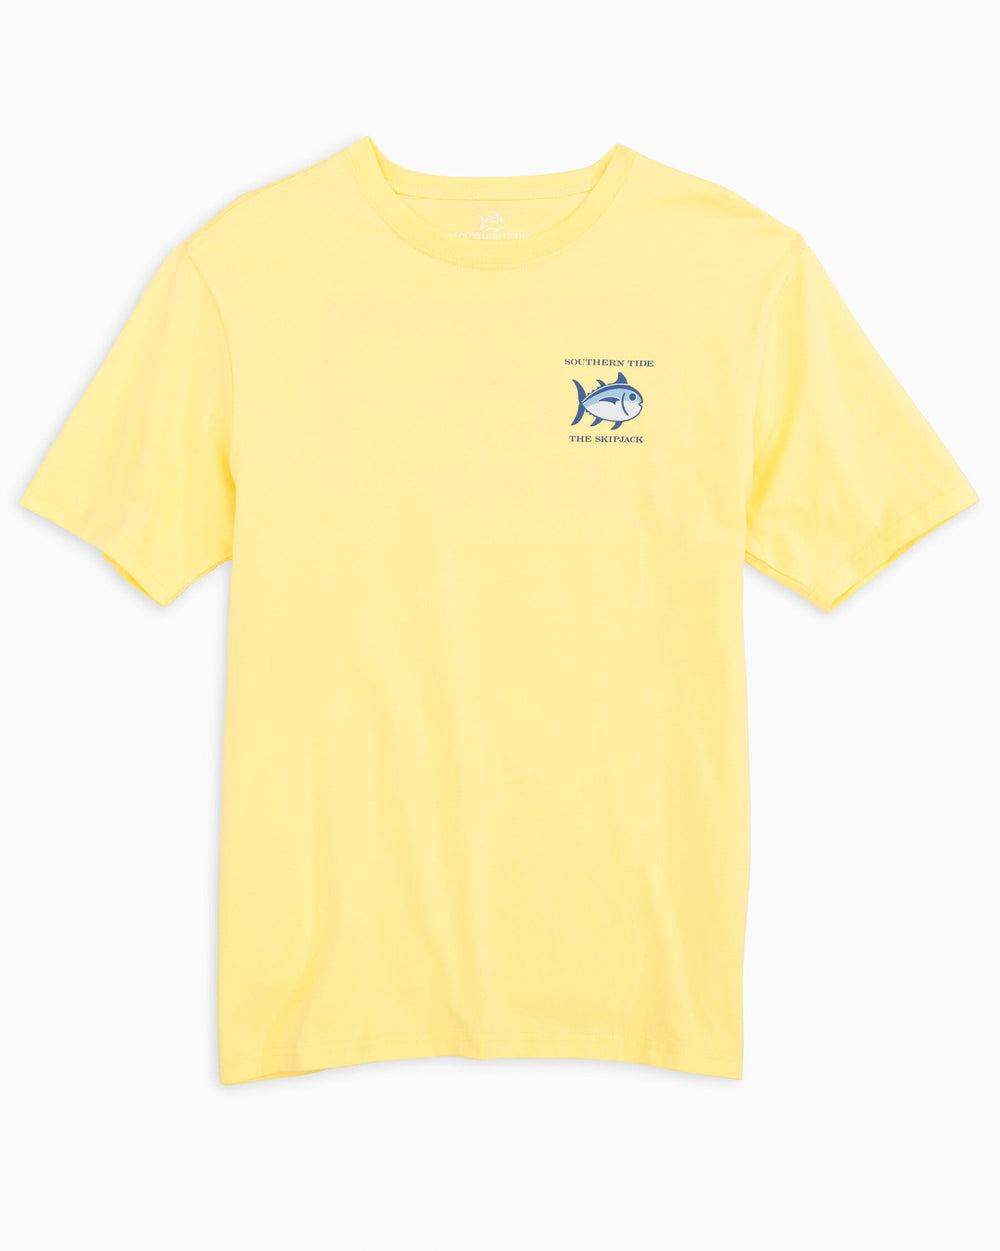 The front view of the Southern Tide Original Skipjack Short Sleeve T-Shirt by Southern Tide - Tuscan Sun